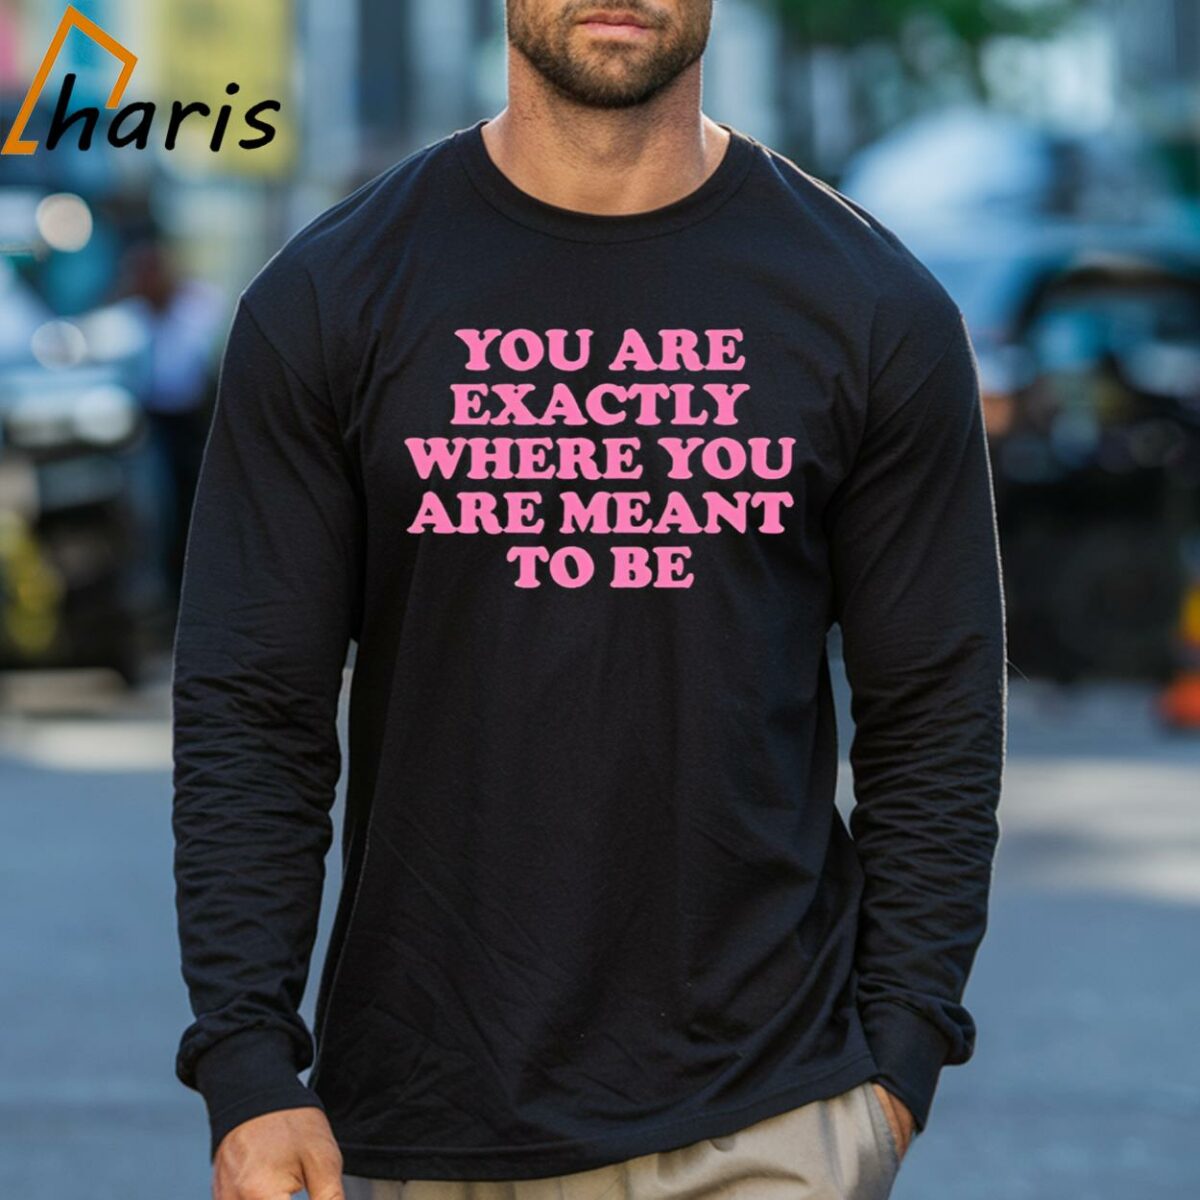 You Are Exactly Where You Are Meant To Be Shirt 3 Long sleeve shirt